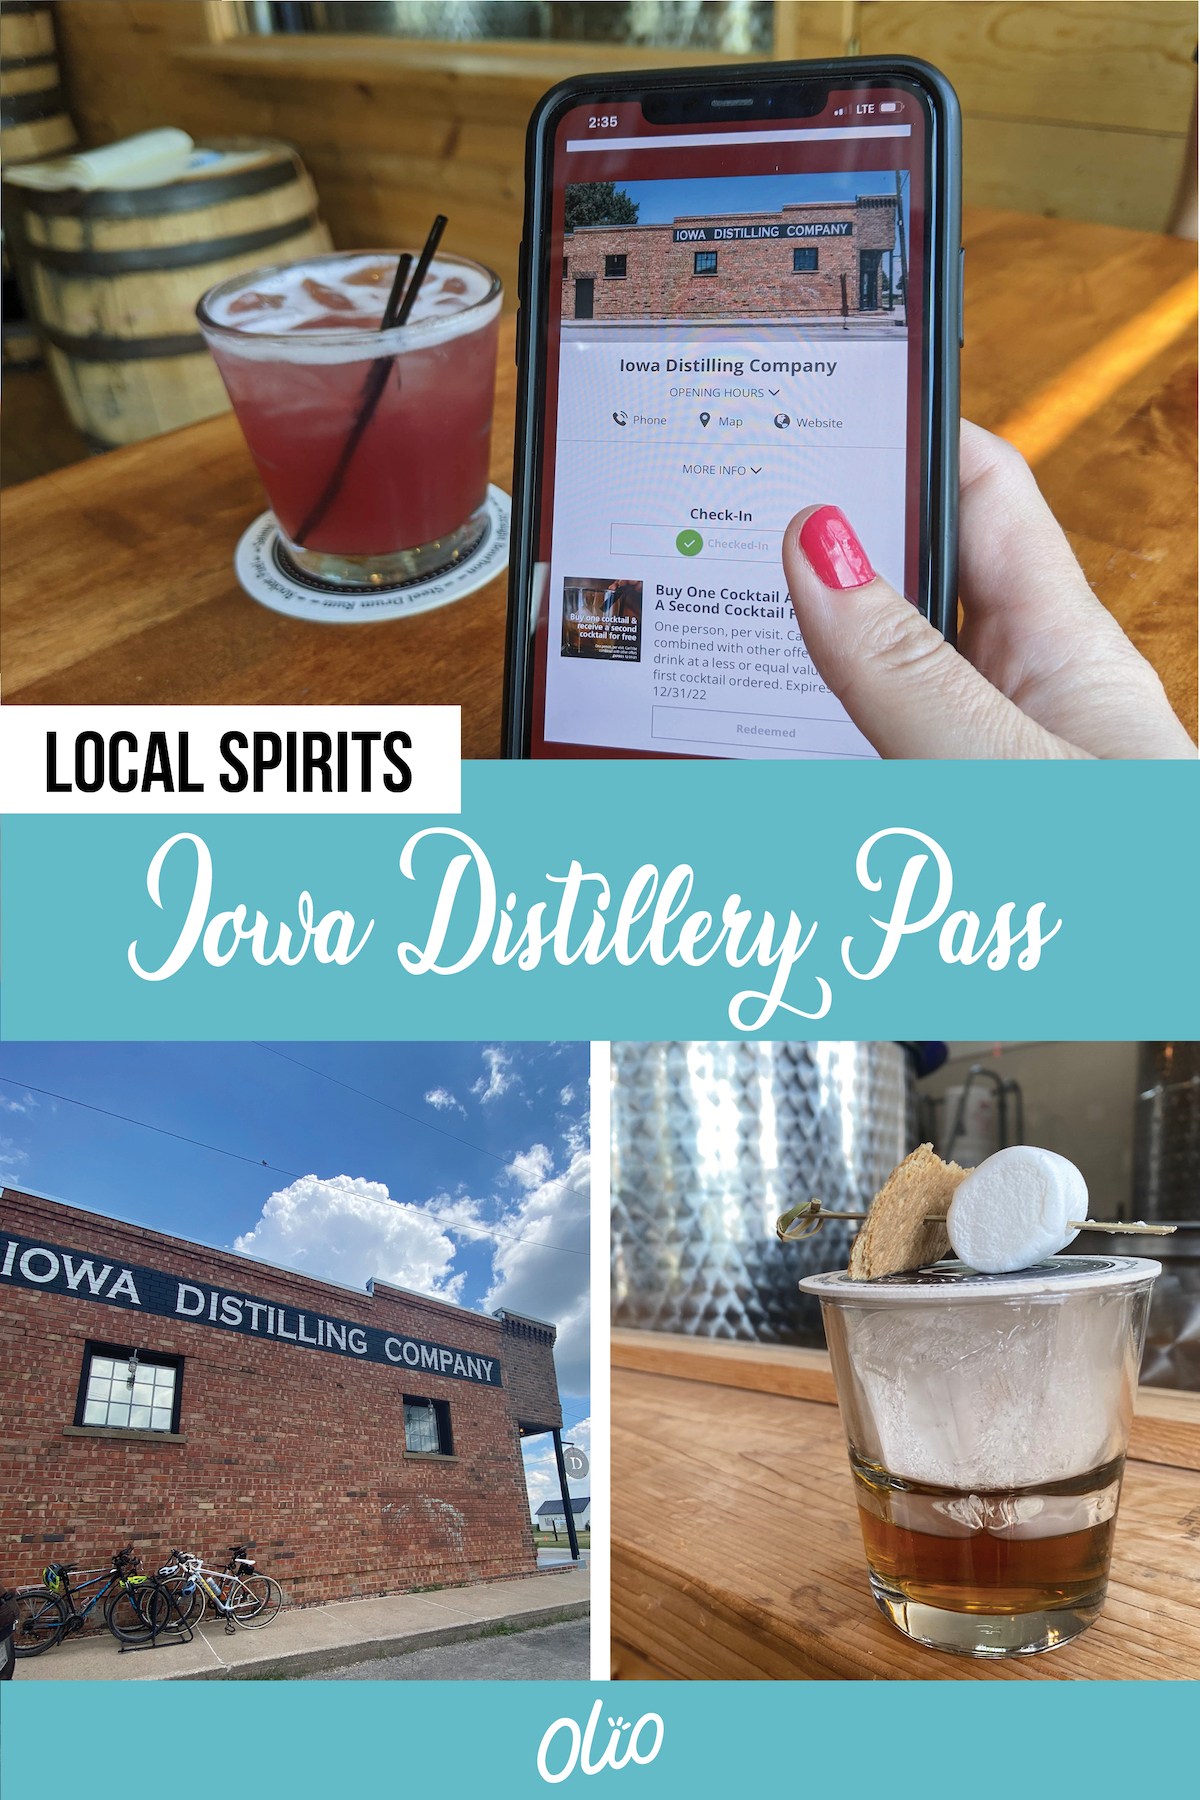 #Ad Looking for the perfect place to enjoy a summer cocktail? Why not choose a local distillery! Now with @IowaTourism’s Iowa Distillery Pass it’s easier than ever to support local makers! Simply sign up for your free digital passport and hit the road to explore distilleries across the state. When you show your passport, you’ll also be eligible for deals and discounts at all of the locations included in the pass. #Iowa #Distillery #Midwest #ThisIsIowa